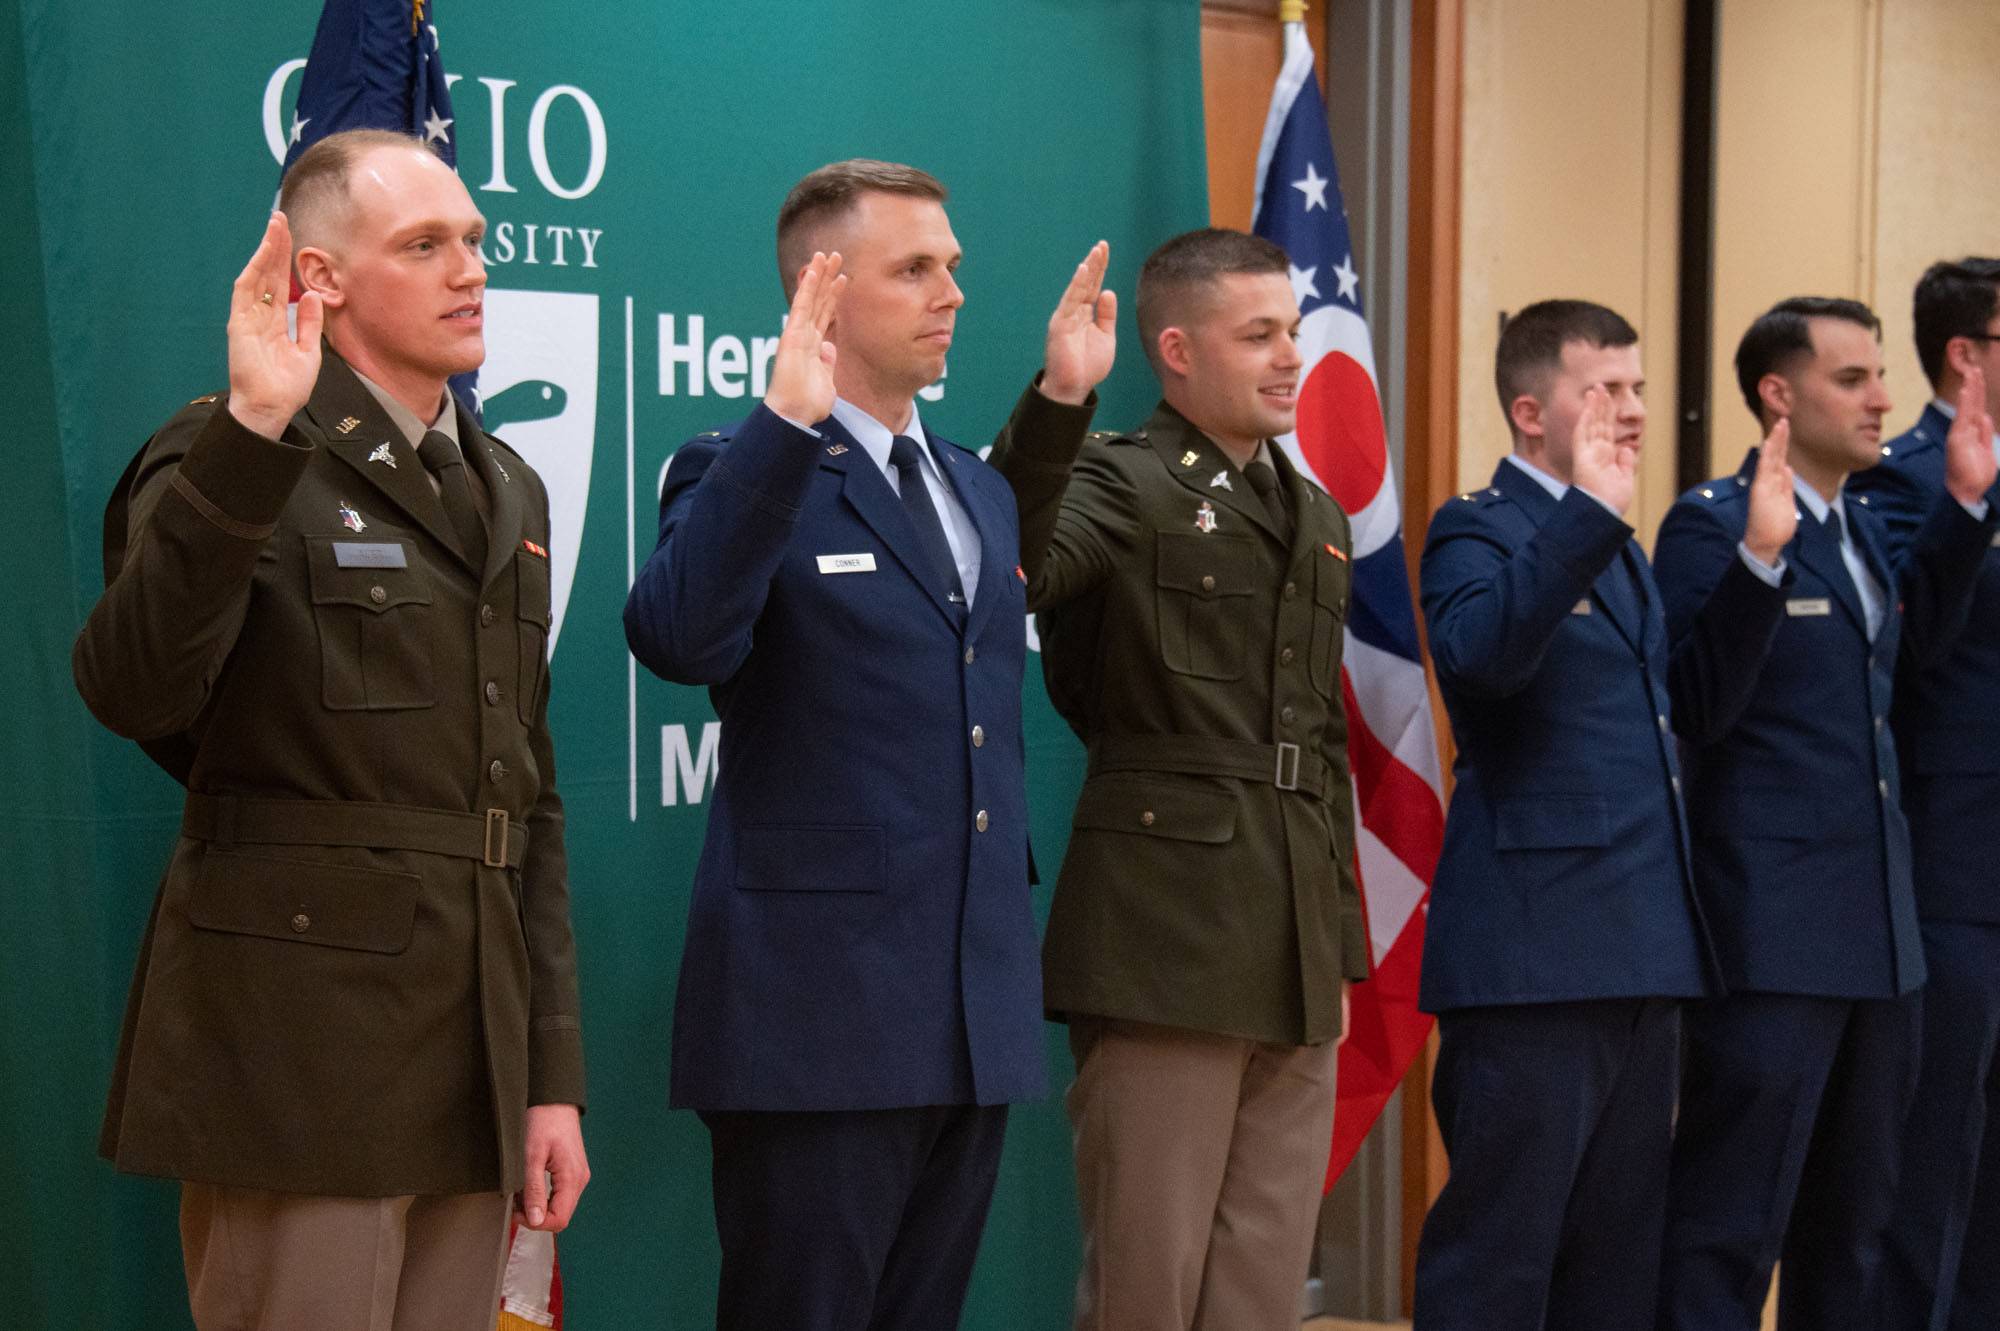 Eight students of the Ohio University Heritage College of Osteopathic Medicine Class of 2023 received commissions during a ceremony following commencement. They will be pursuing a career in military medicine and caring for members of the Armed Forces and their families.